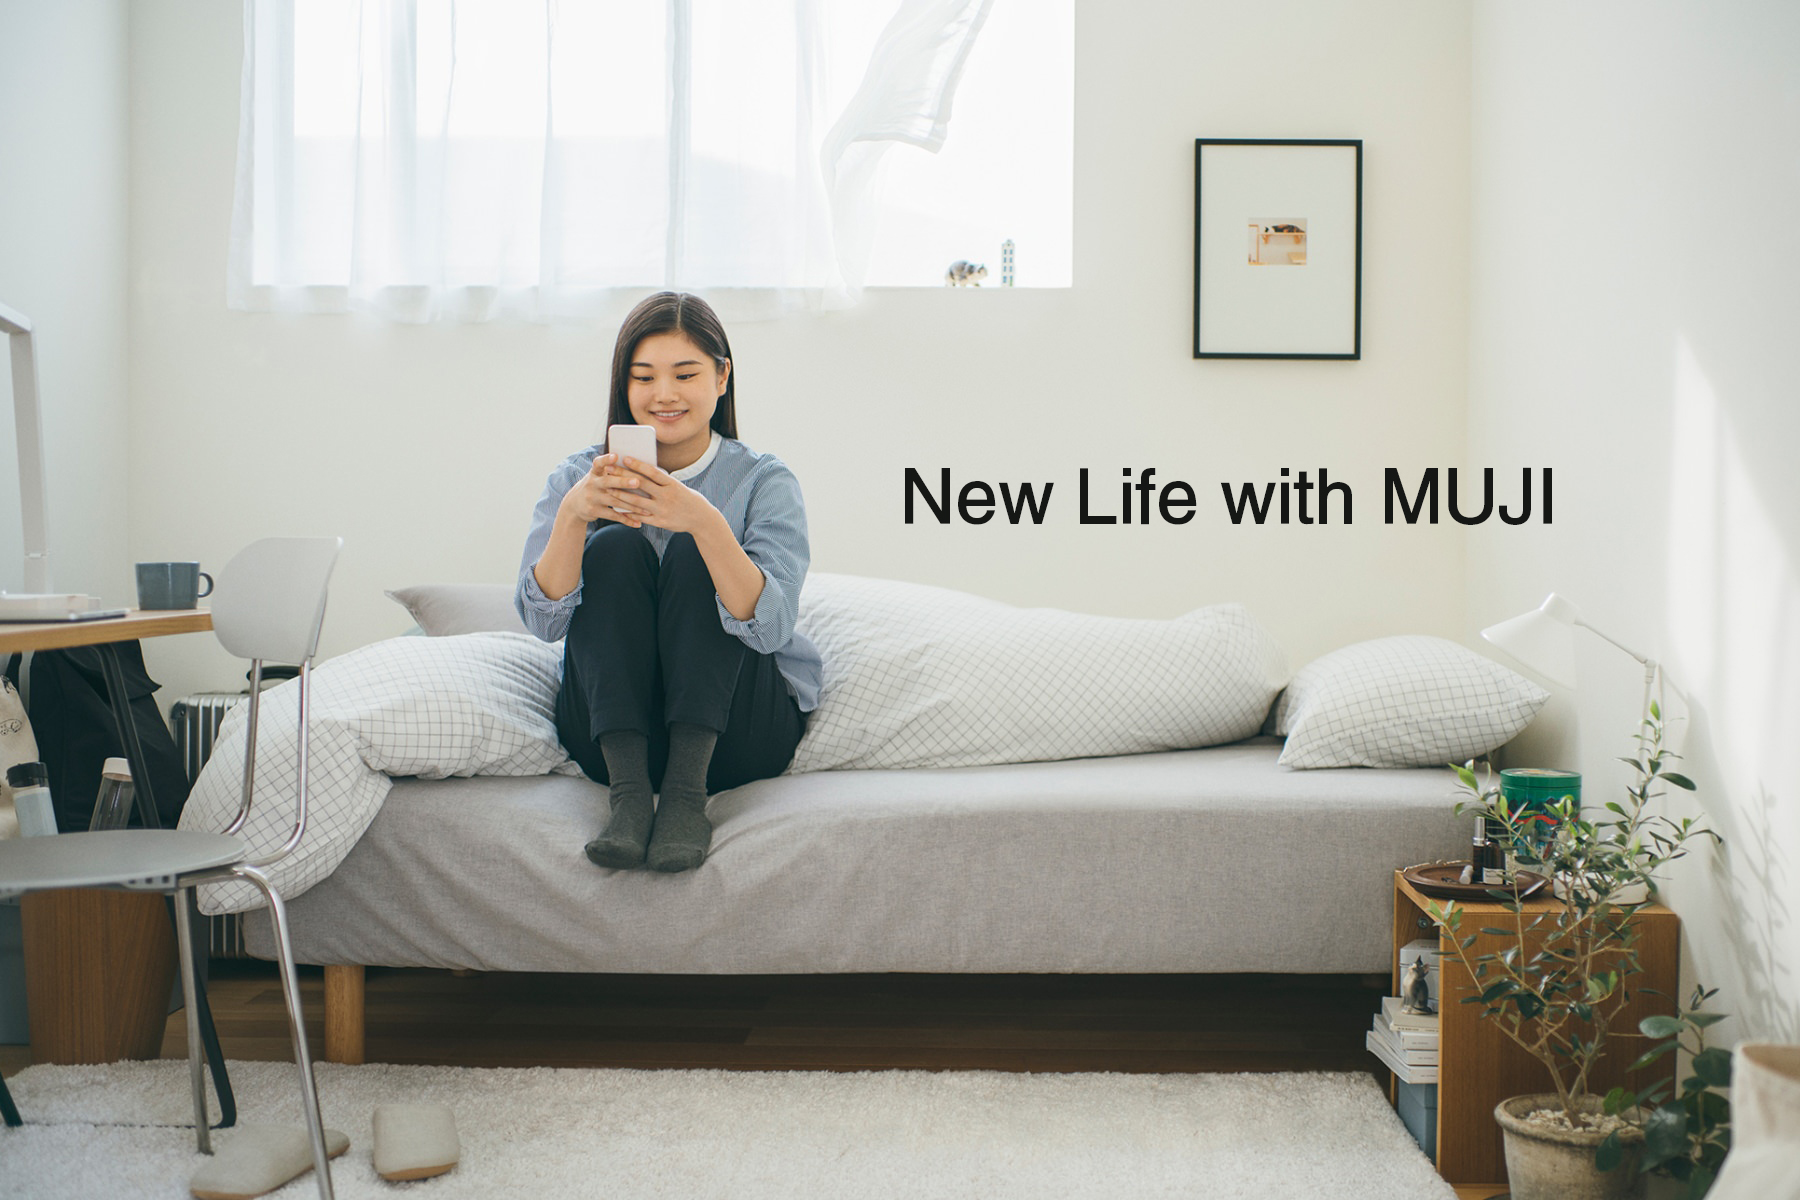 New Life with MUJI